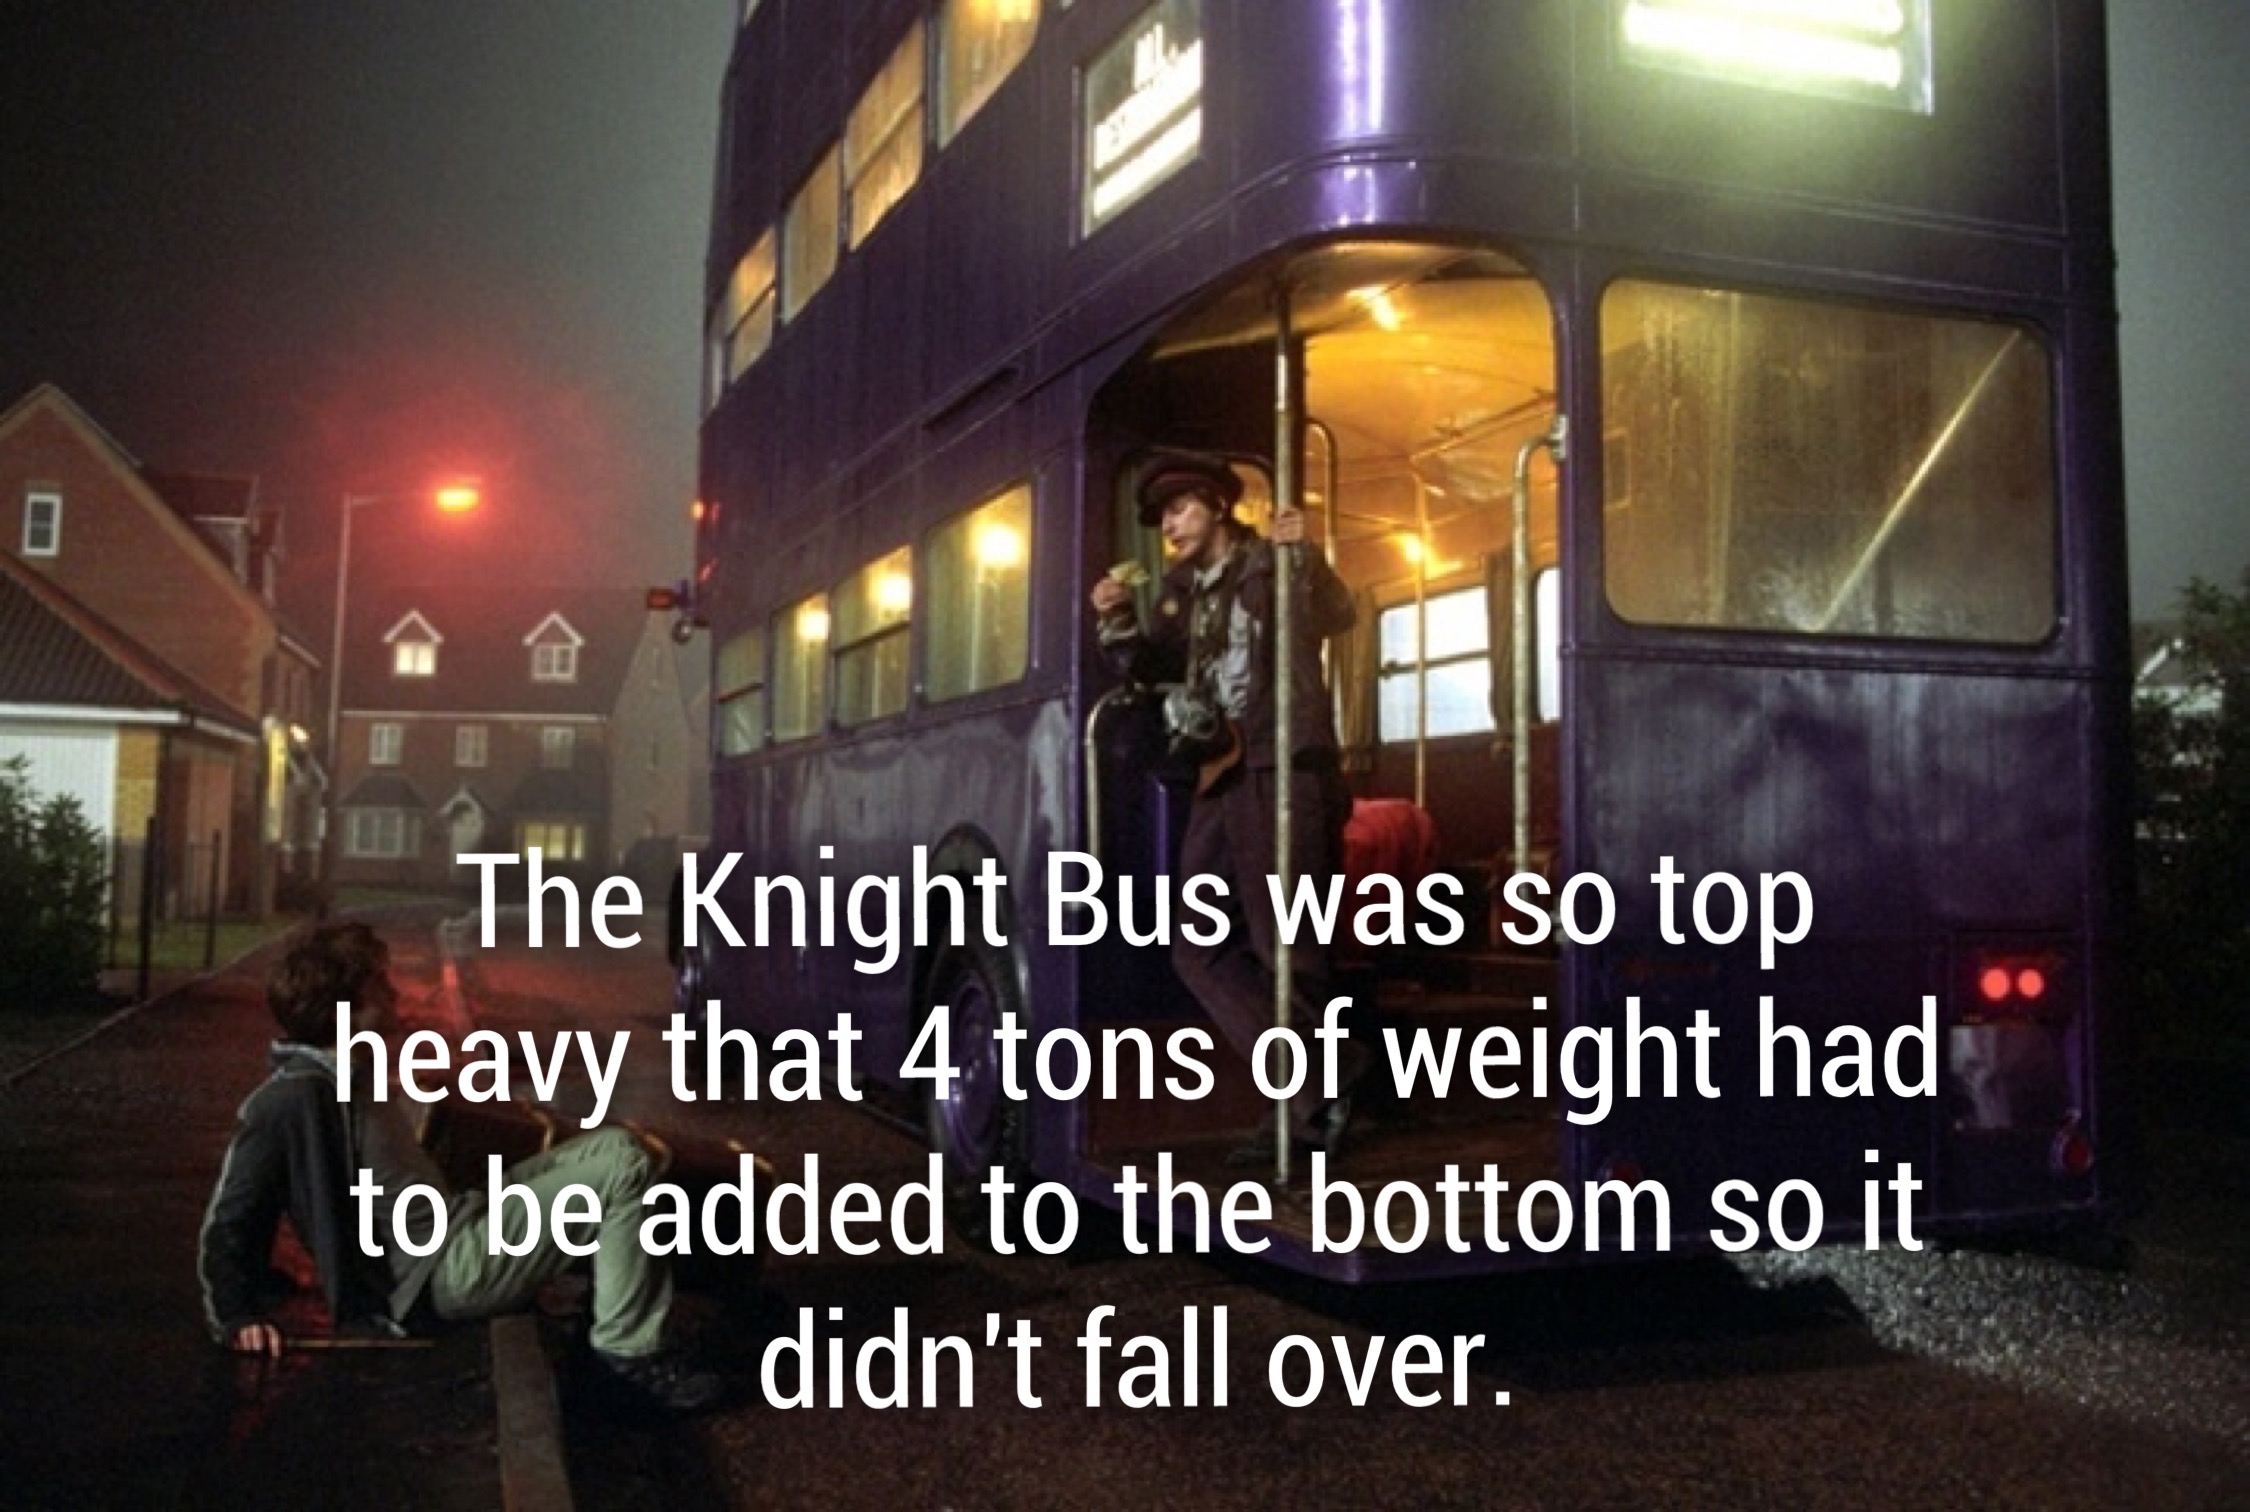 harry potter and the prisoner of azkaban knight bus - The Knight Bus was so top heavy that 4 tons of weight had to be added to the bottom so it didn't fall over.